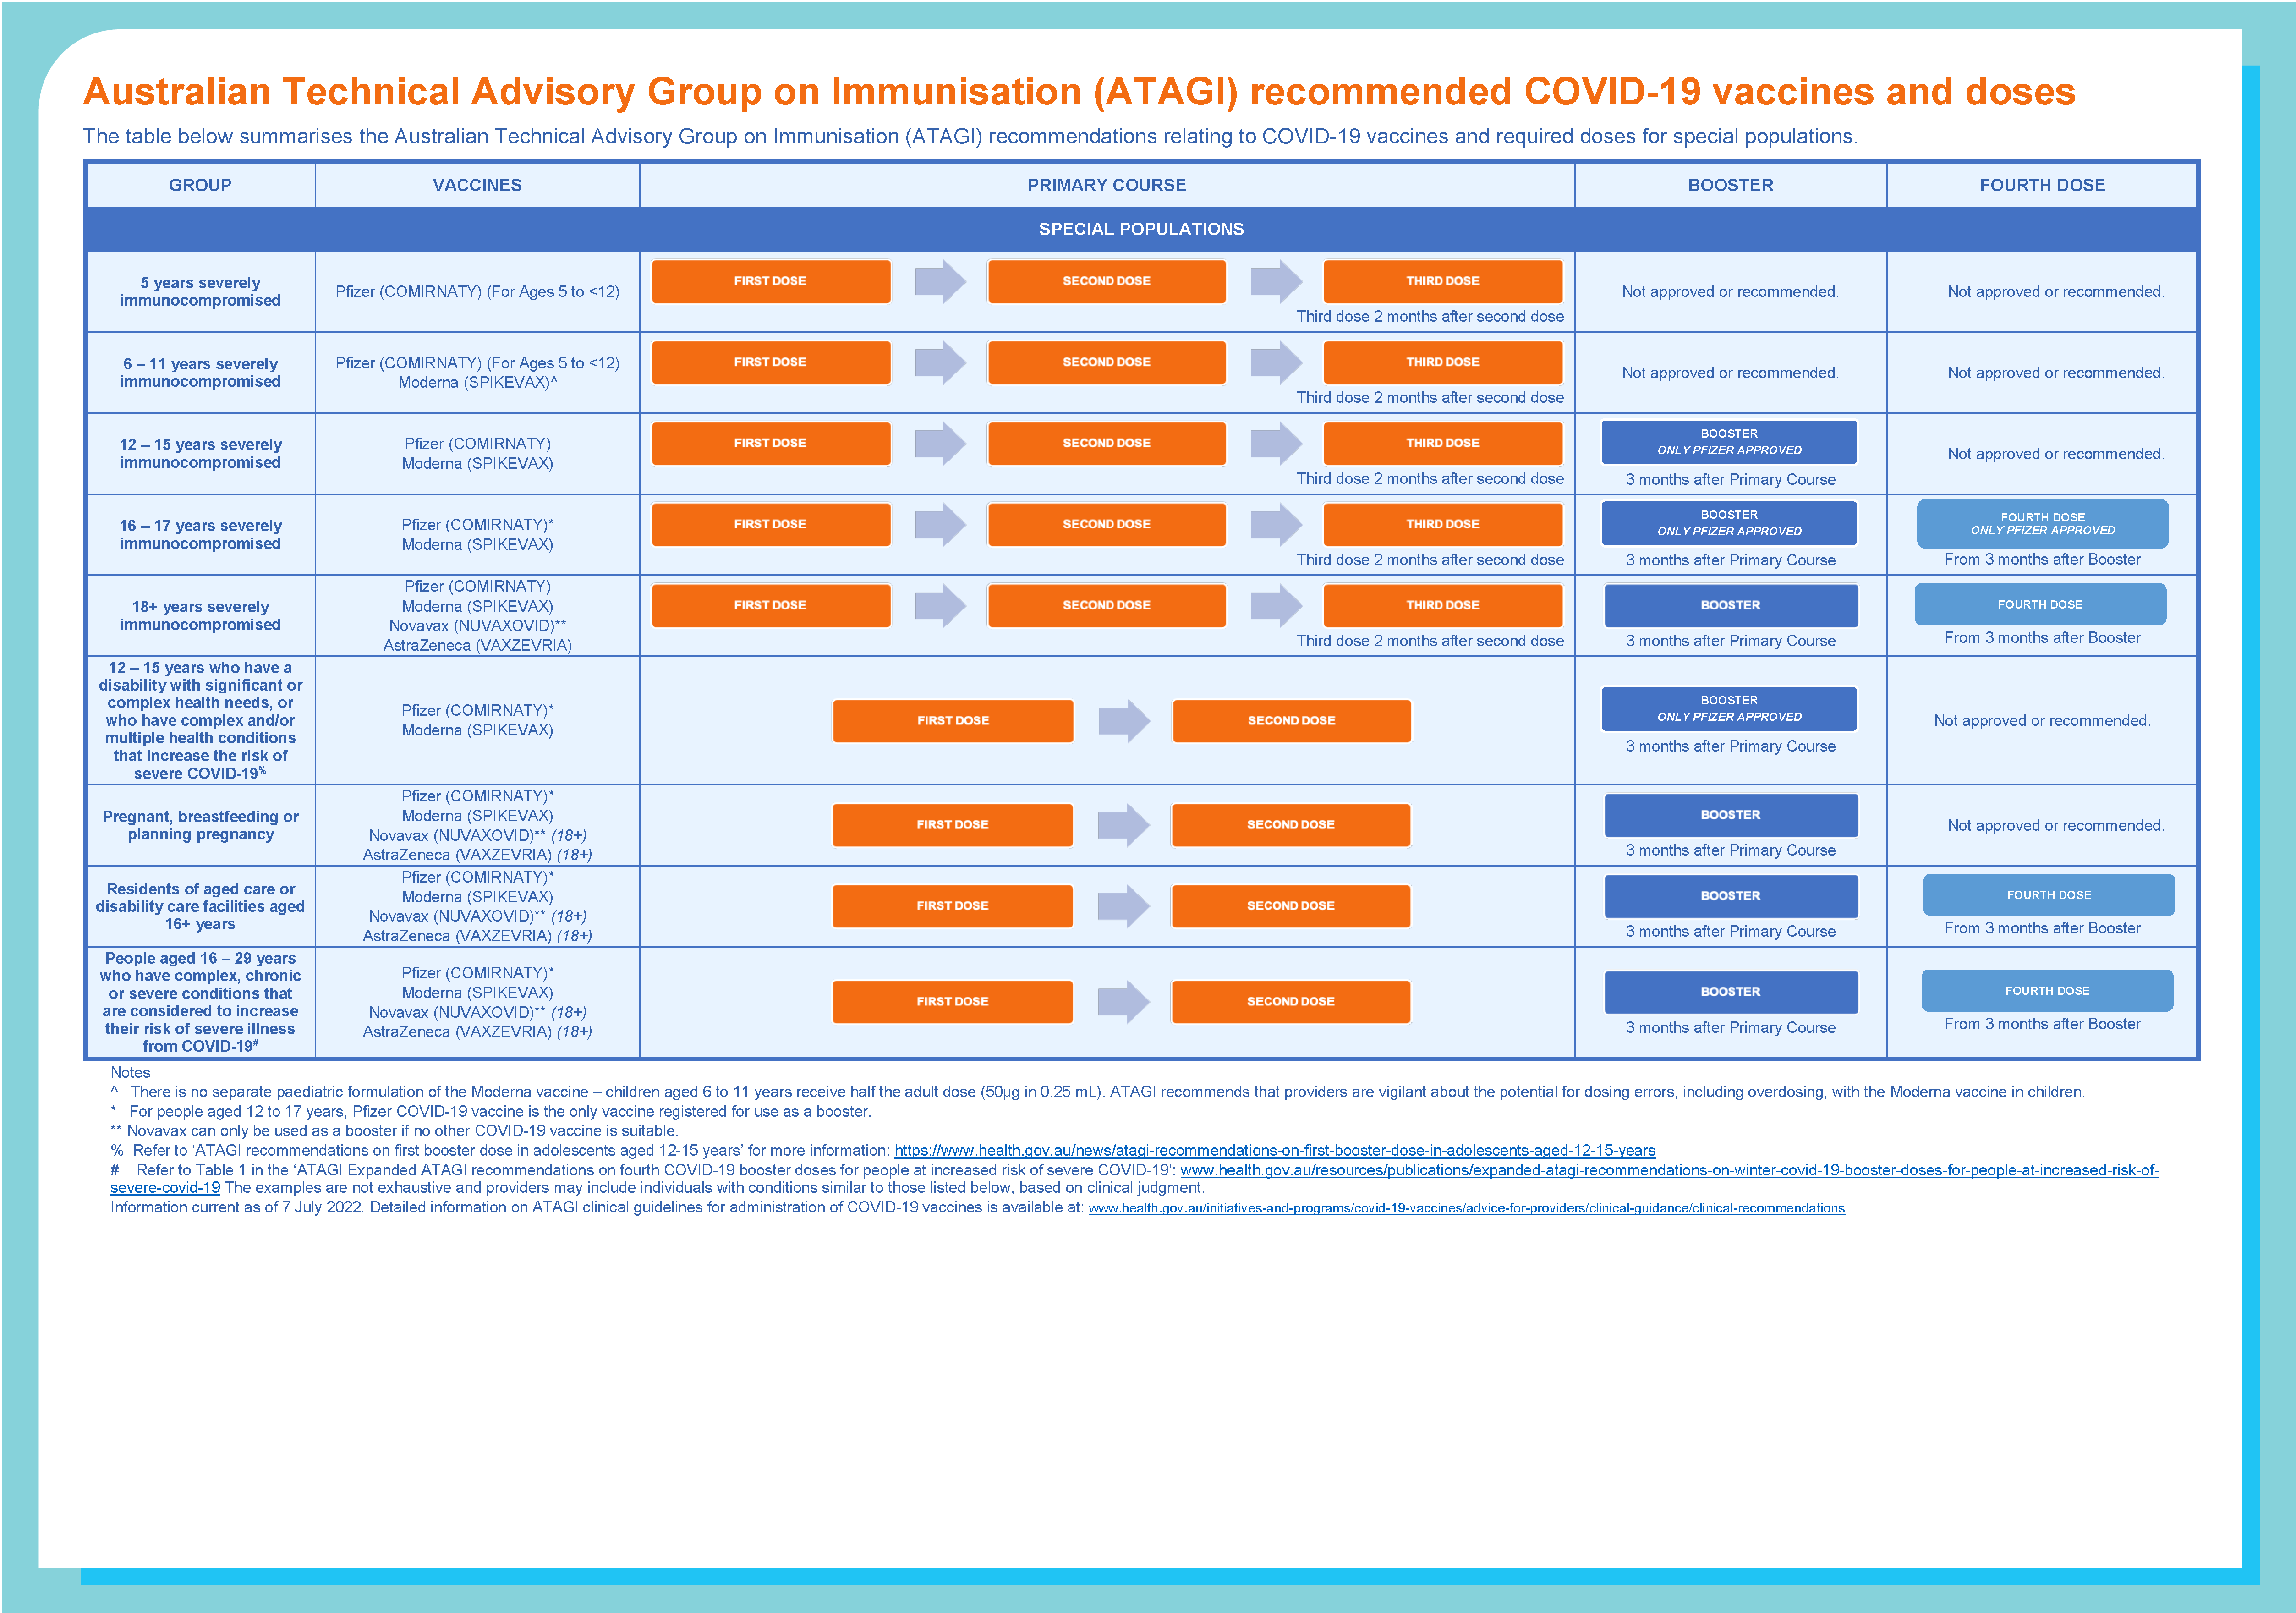 atagi recommended covid 19 doses and vaccines poster atagi recommended covid 19 doses and vaccines